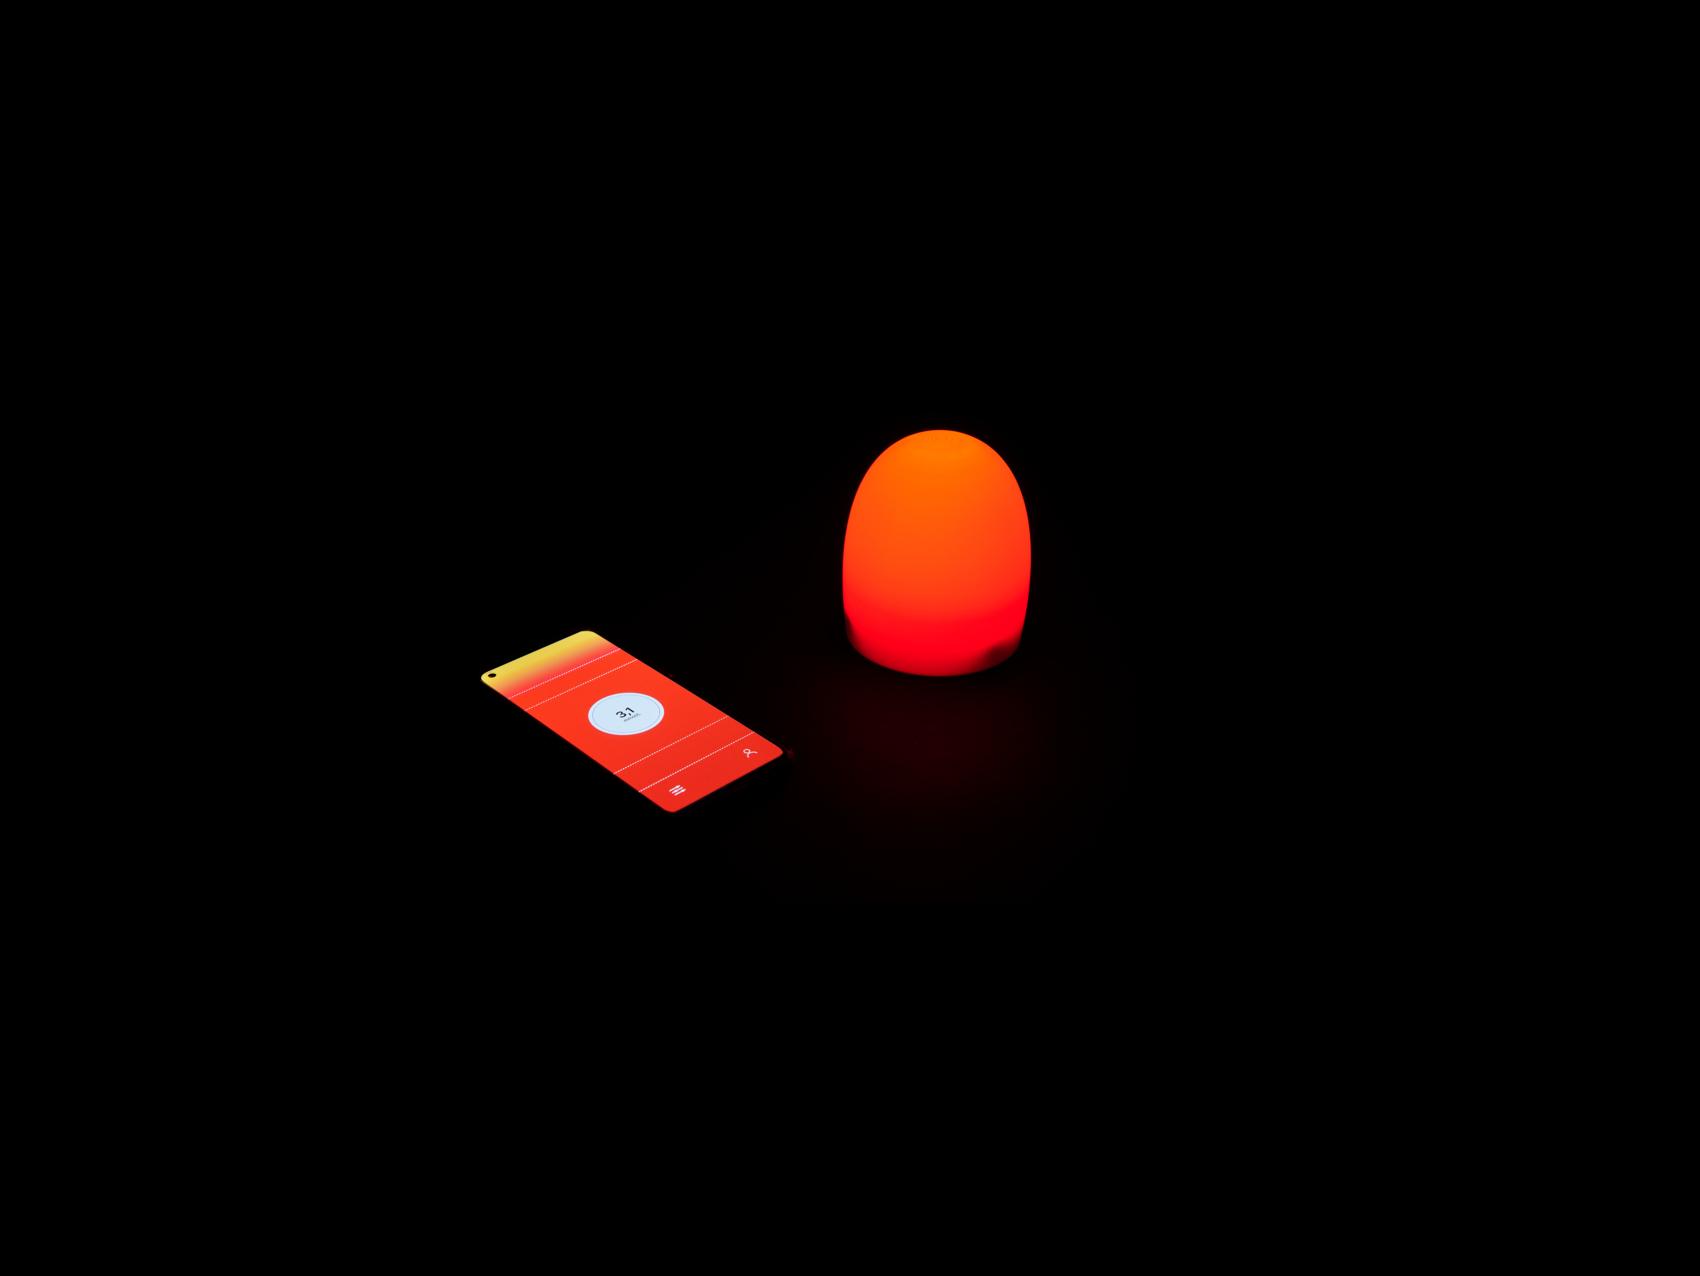 The image shows a smartphone with a red-lit screen displaying low blood sugar levels at 3,1 mmol, placed next to a small, glowing red lamp, both in a dark environment